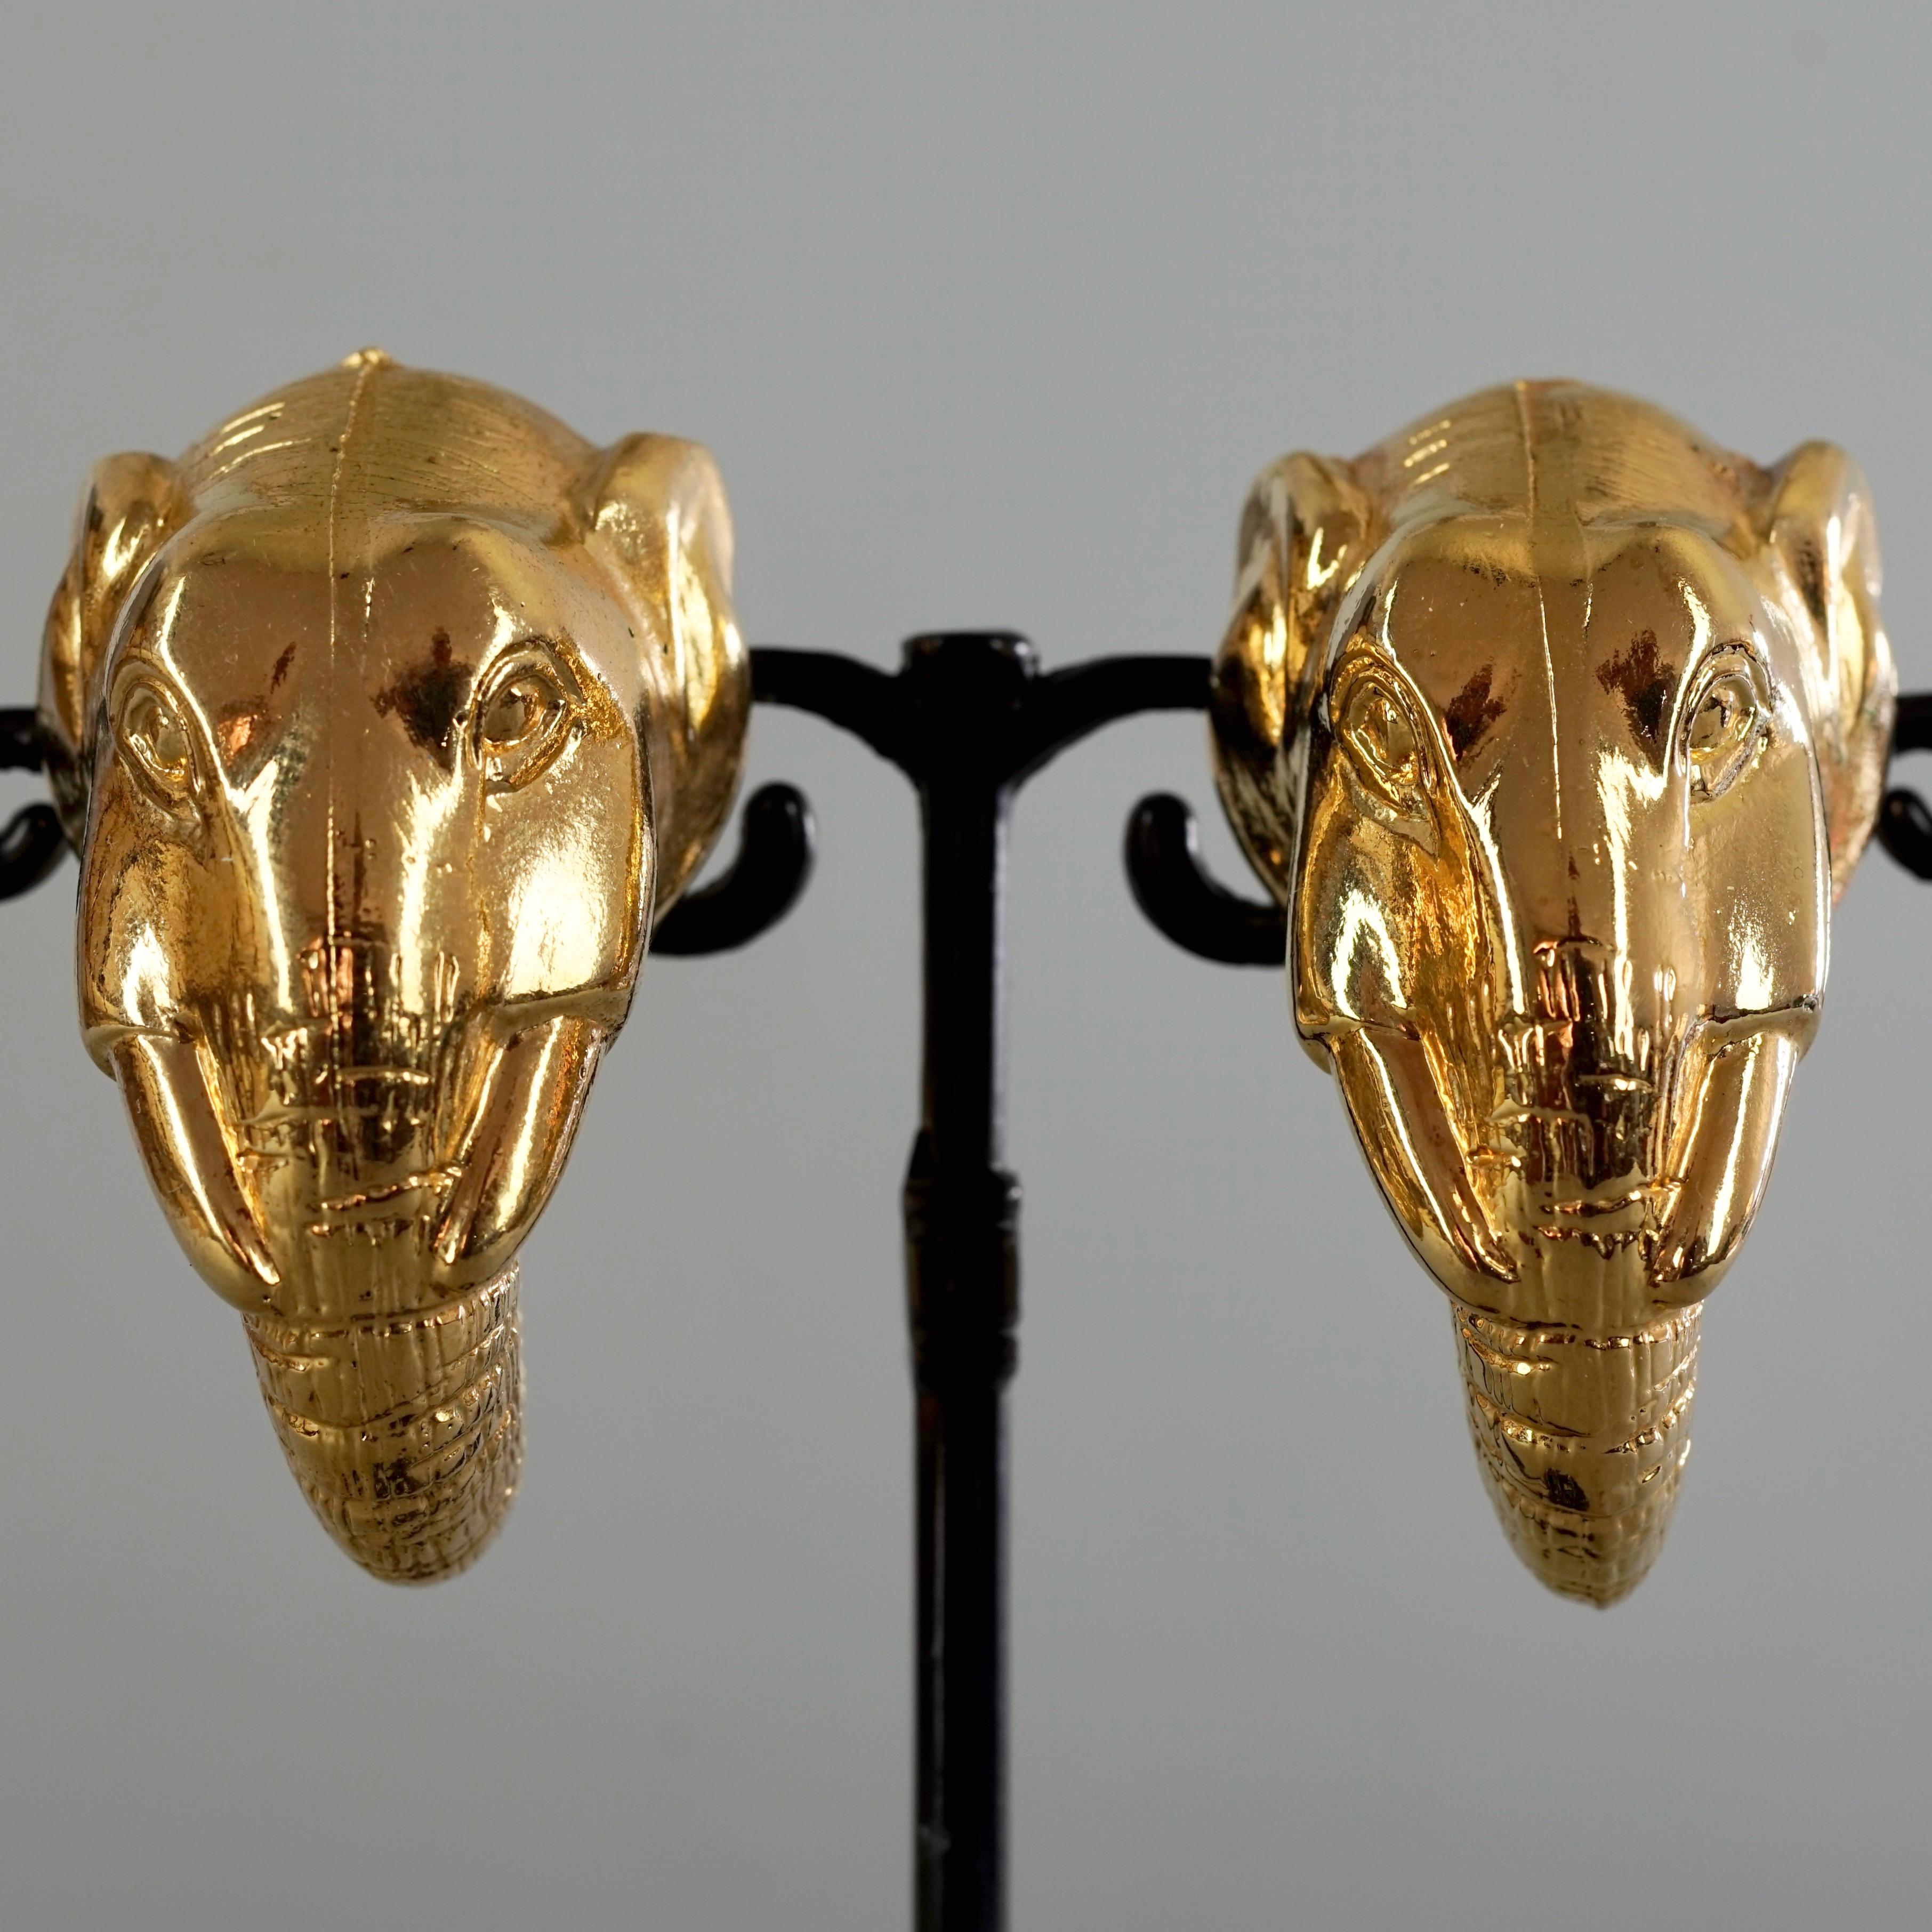 Vintage Massive Elephant Head Figural Hoop Creole Earrings In Excellent Condition For Sale In Kingersheim, Alsace